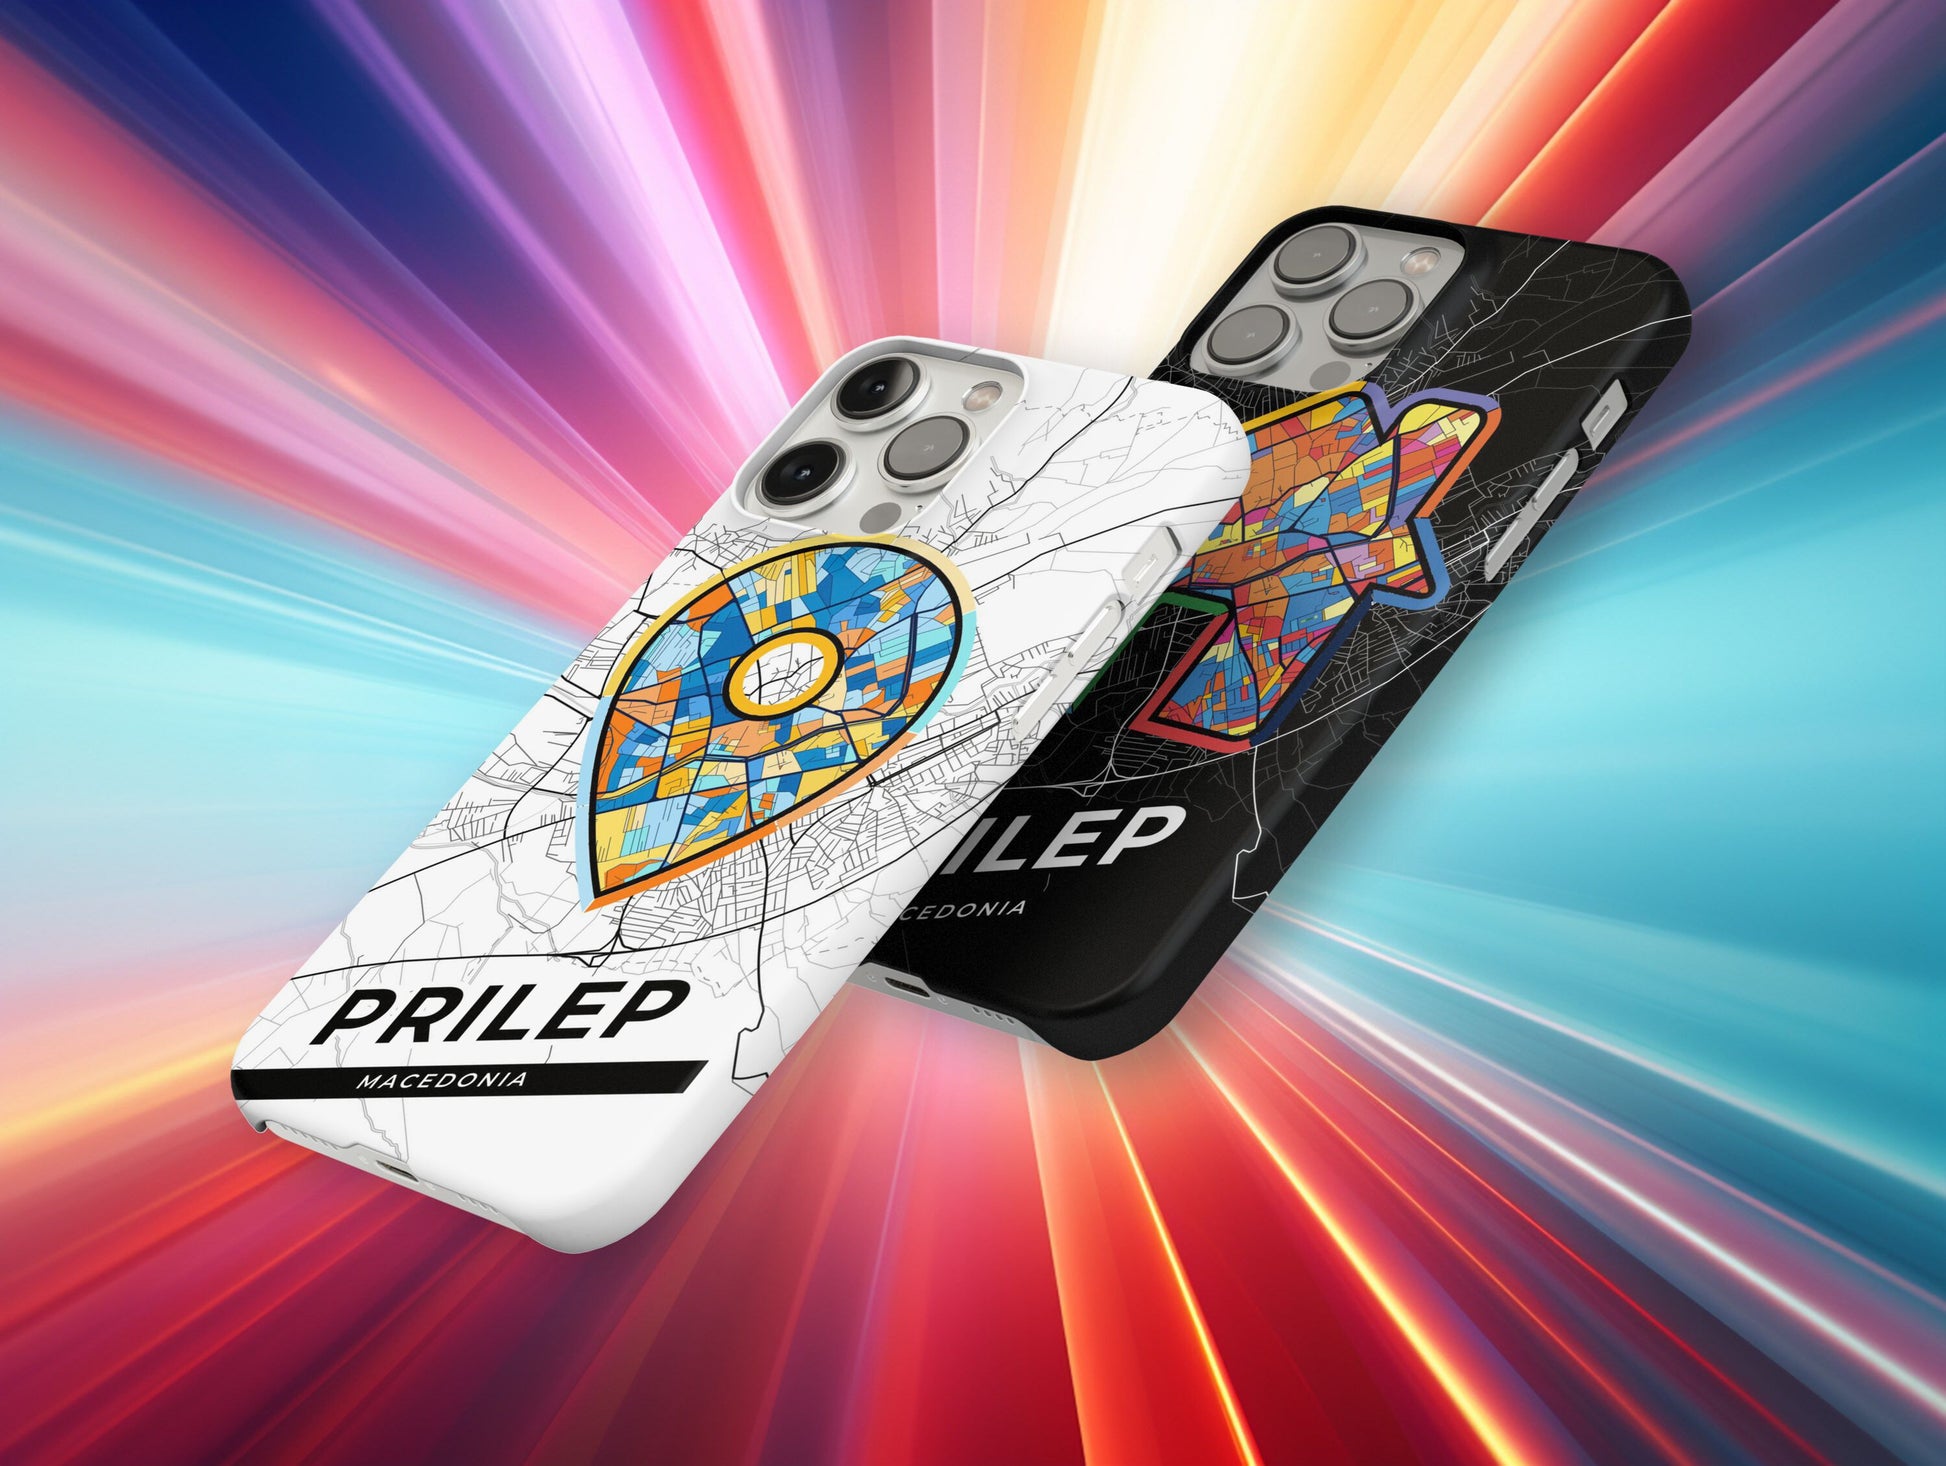 Prilep North Macedonia slim phone case with colorful icon. Birthday, wedding or housewarming gift. Couple match cases.